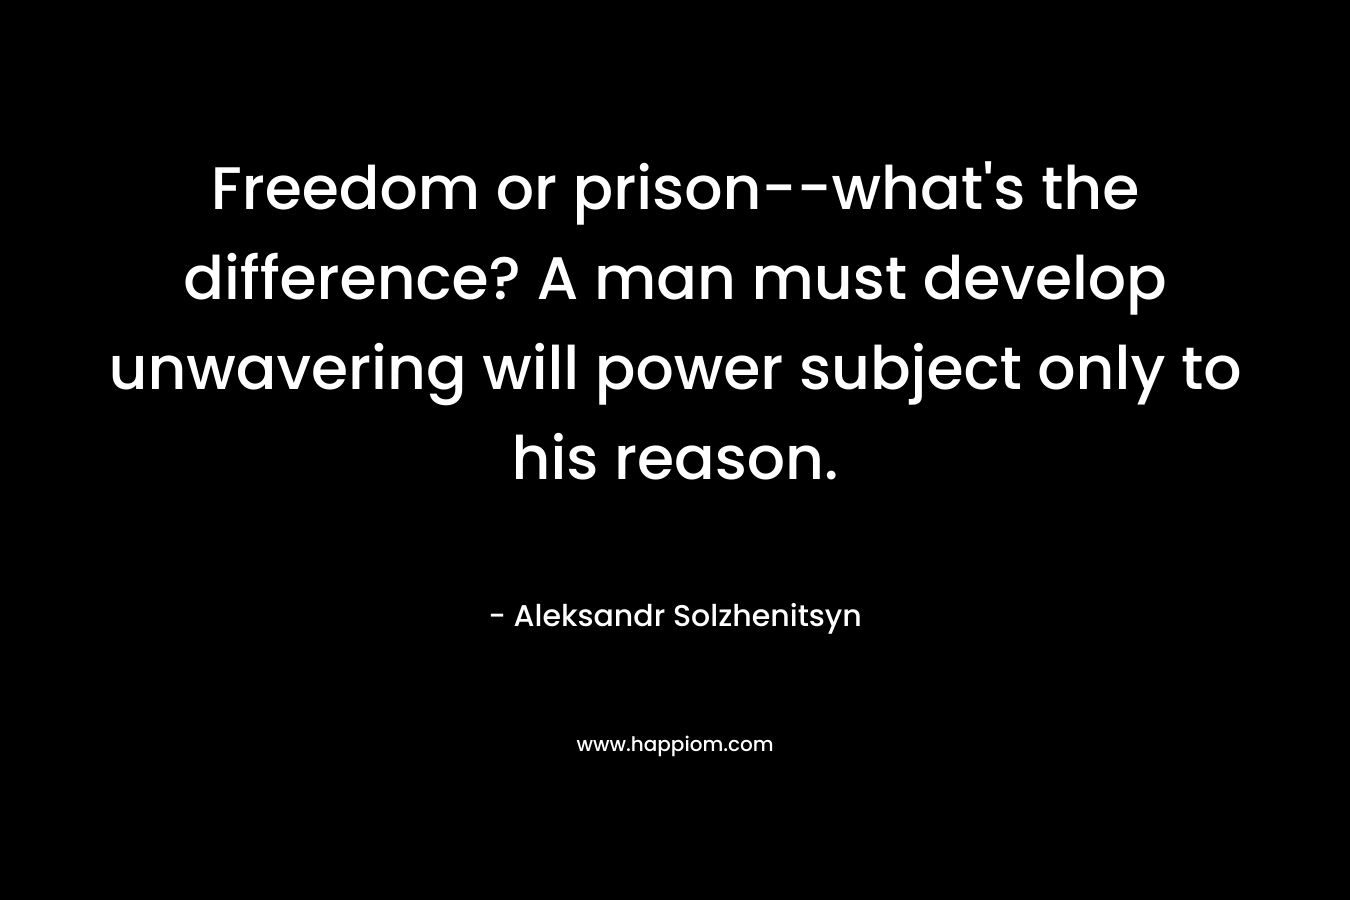 Freedom or prison--what's the difference? A man must develop unwavering will power subject only to his reason.